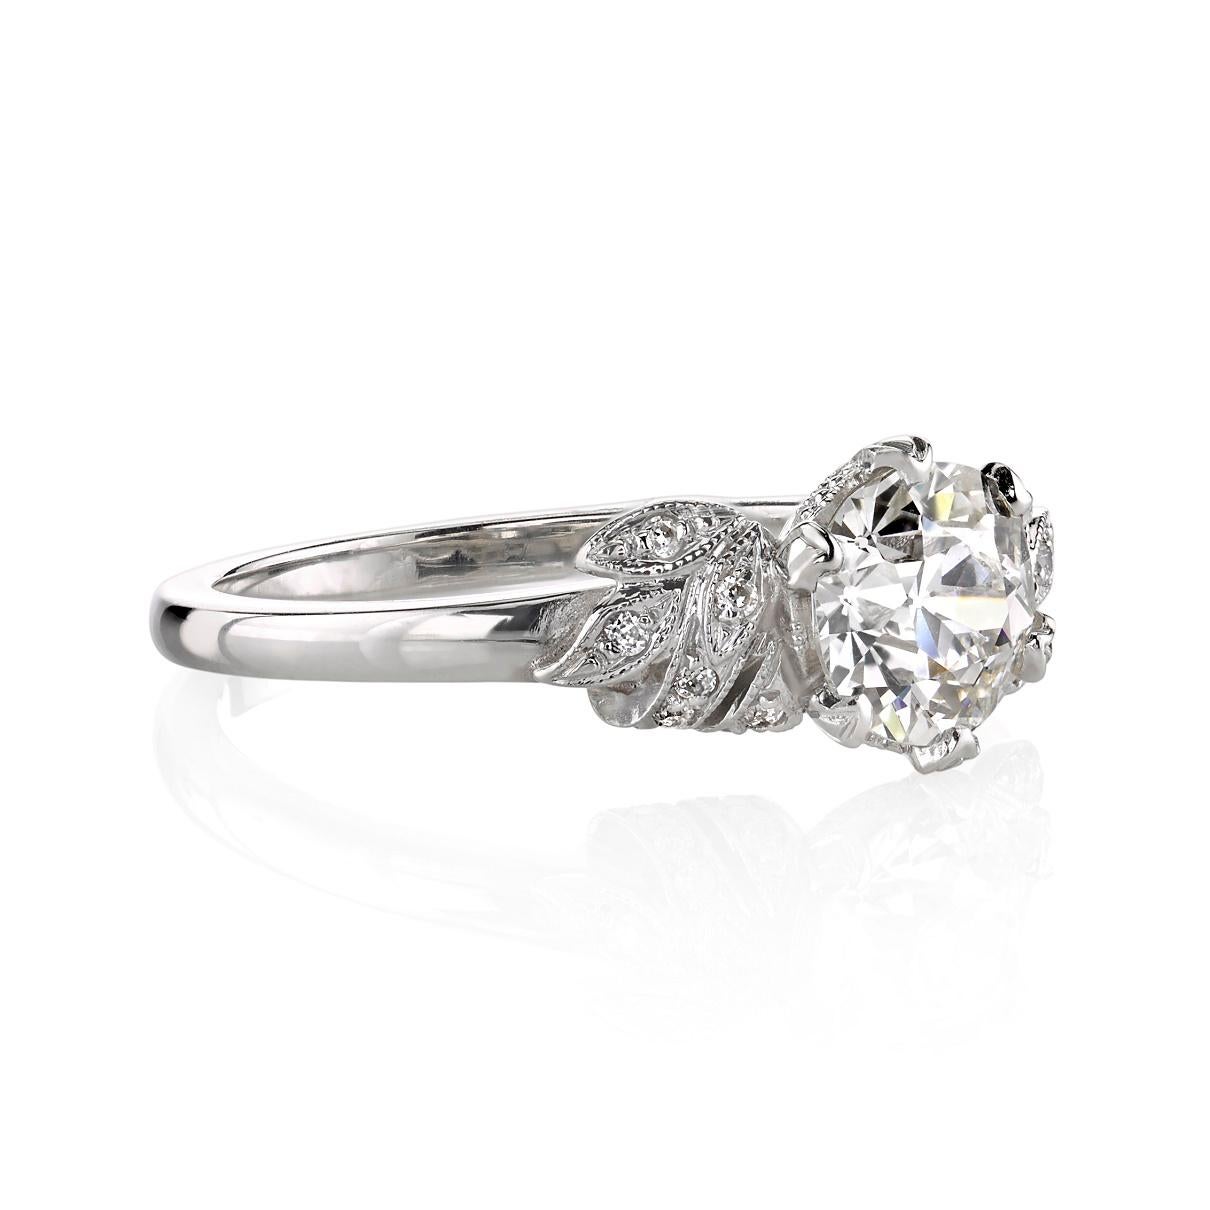 1.00ct H/VS2 EGL certified old European cut diamond with 0.07ctw old European cut accent diamonds set in a handcrafted platinum mounting.

Ring is currently a size 6 and can be sized to fit. 

Our jewelry is made locally in Los Angeles and most